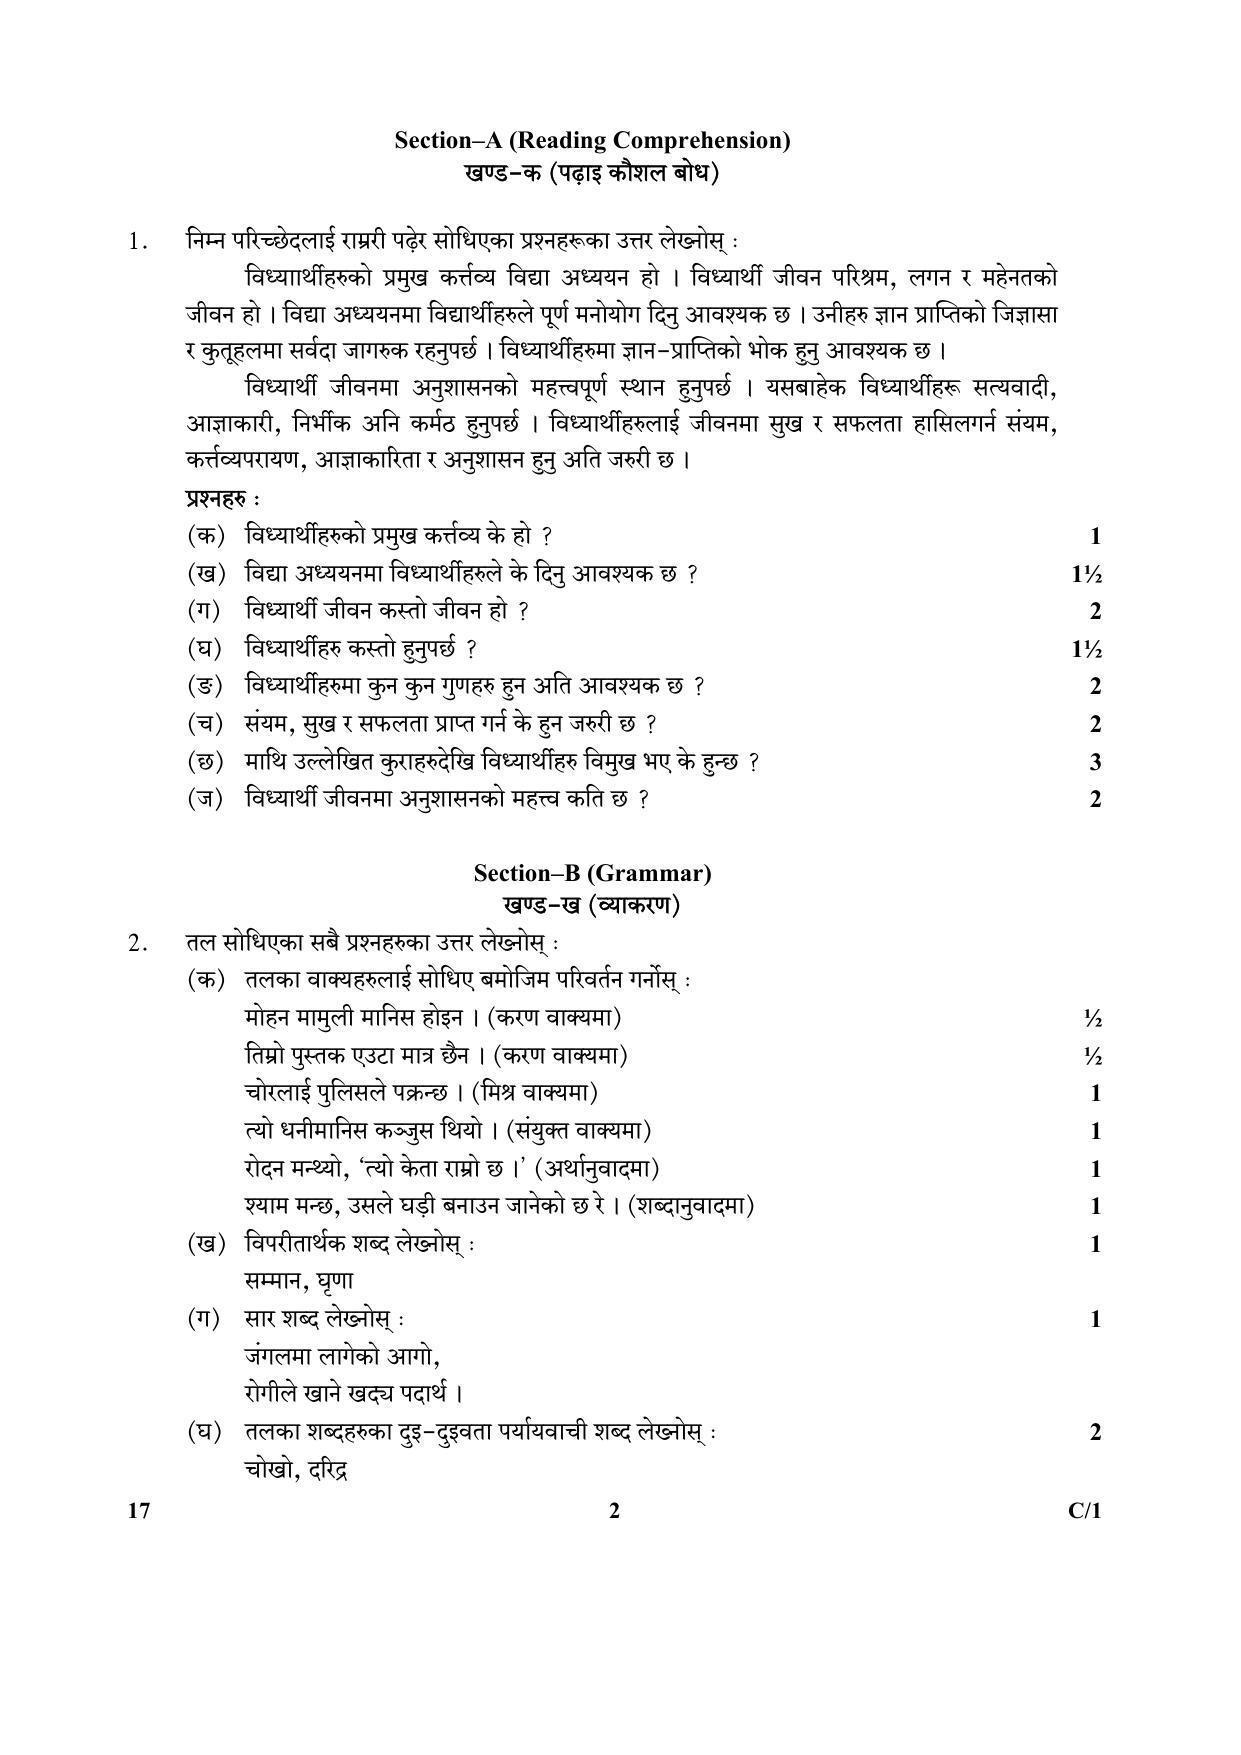 CBSE Class 10 17 (Nepali) 2018 Compartment Question Paper - Page 2